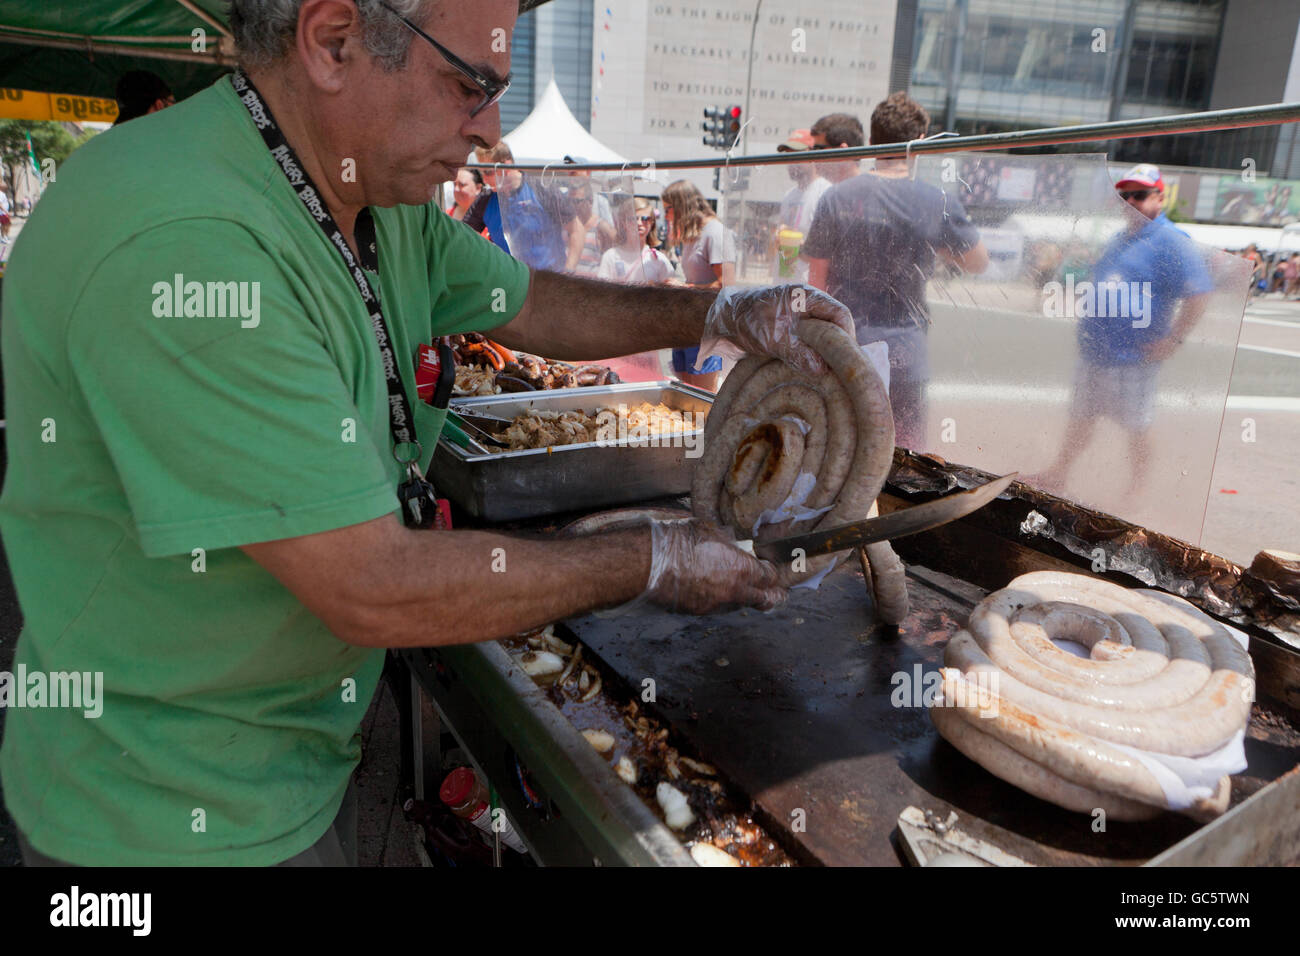 Outdoor cultural festival food vendor grilling sausages - USA Stock Photo